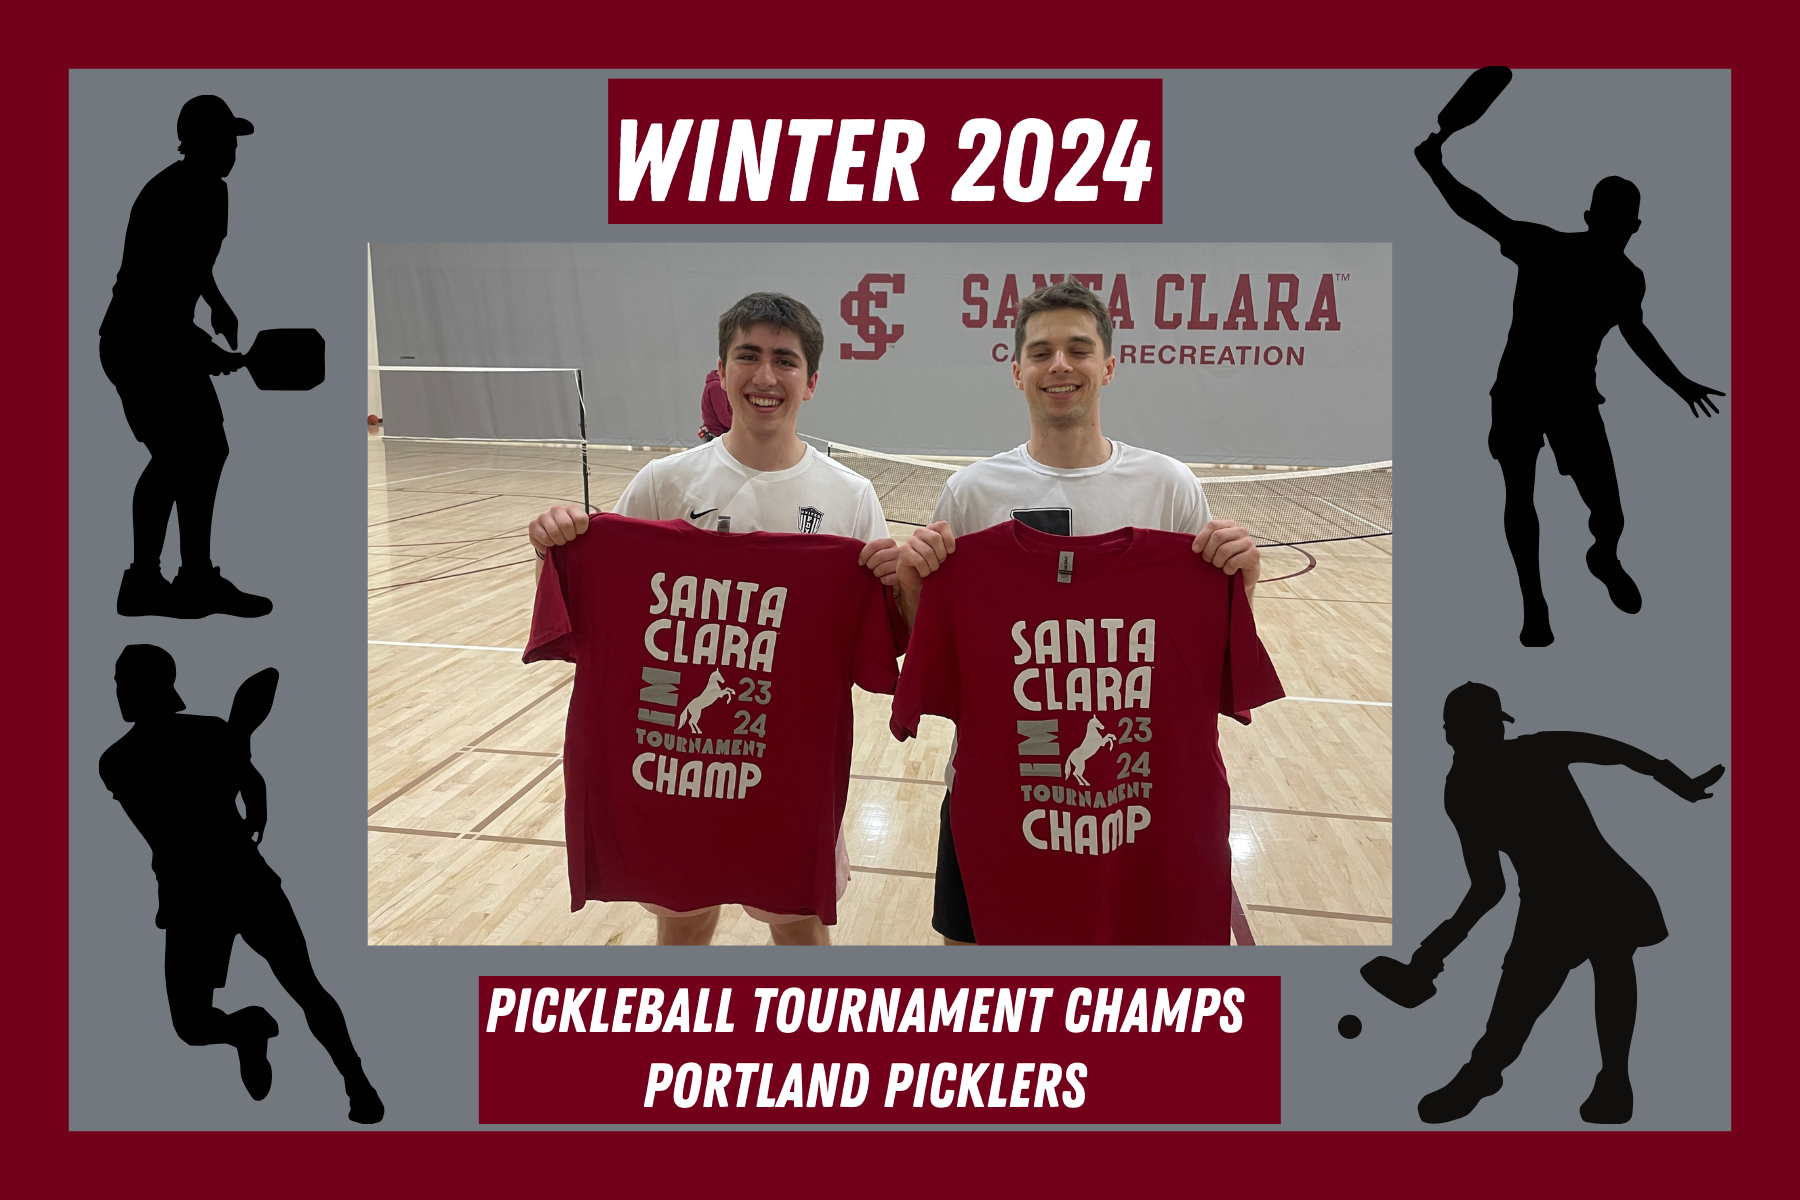 Photo of Pickleball tournament winners, the Portland Picklers, posing with their Tournament champion t shirts.